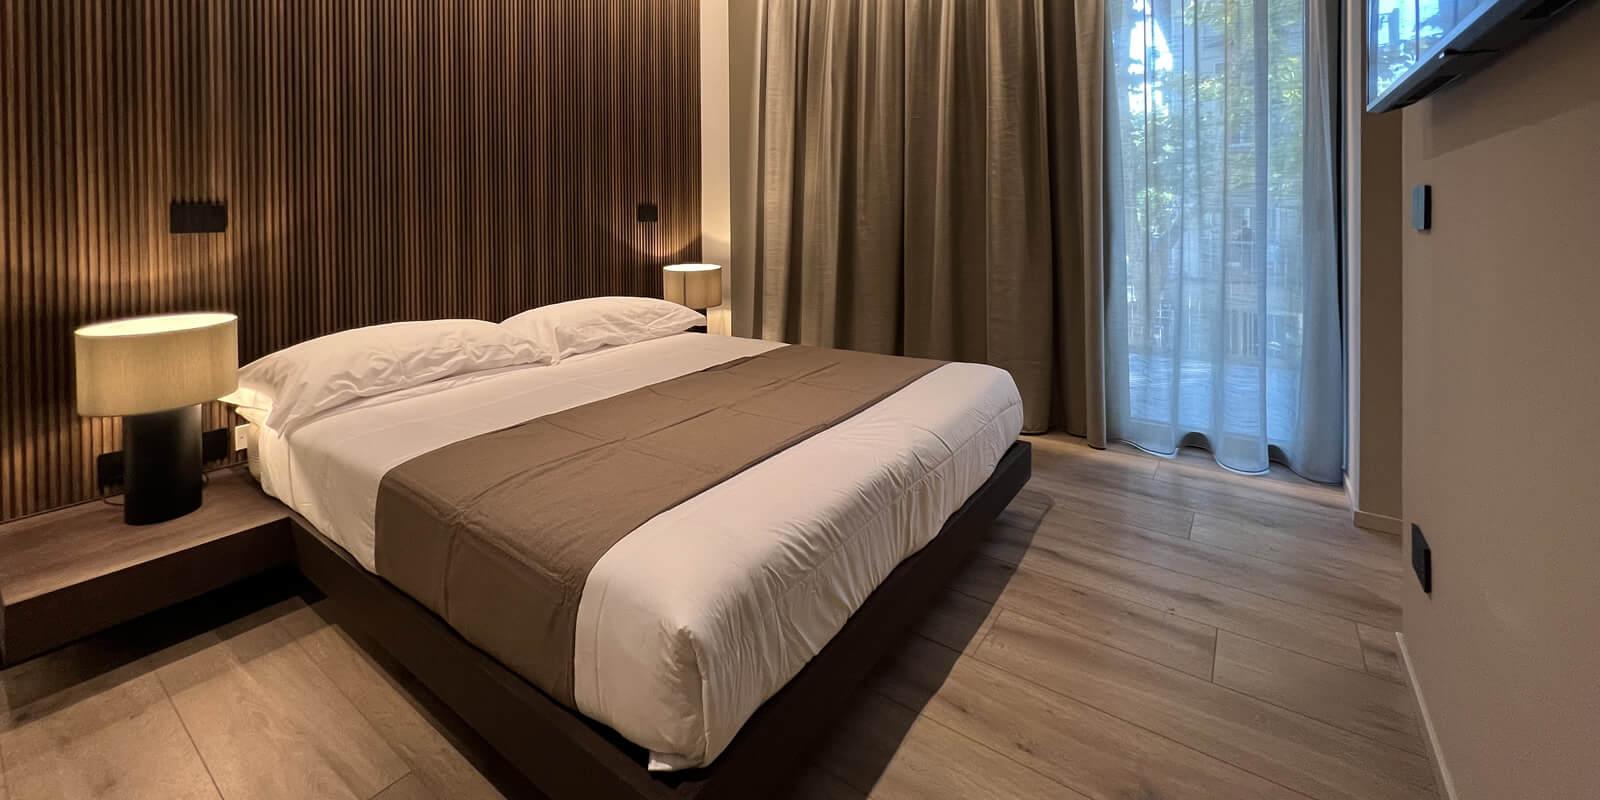 Modern room with double bed, wooden wall, and soft lighting.